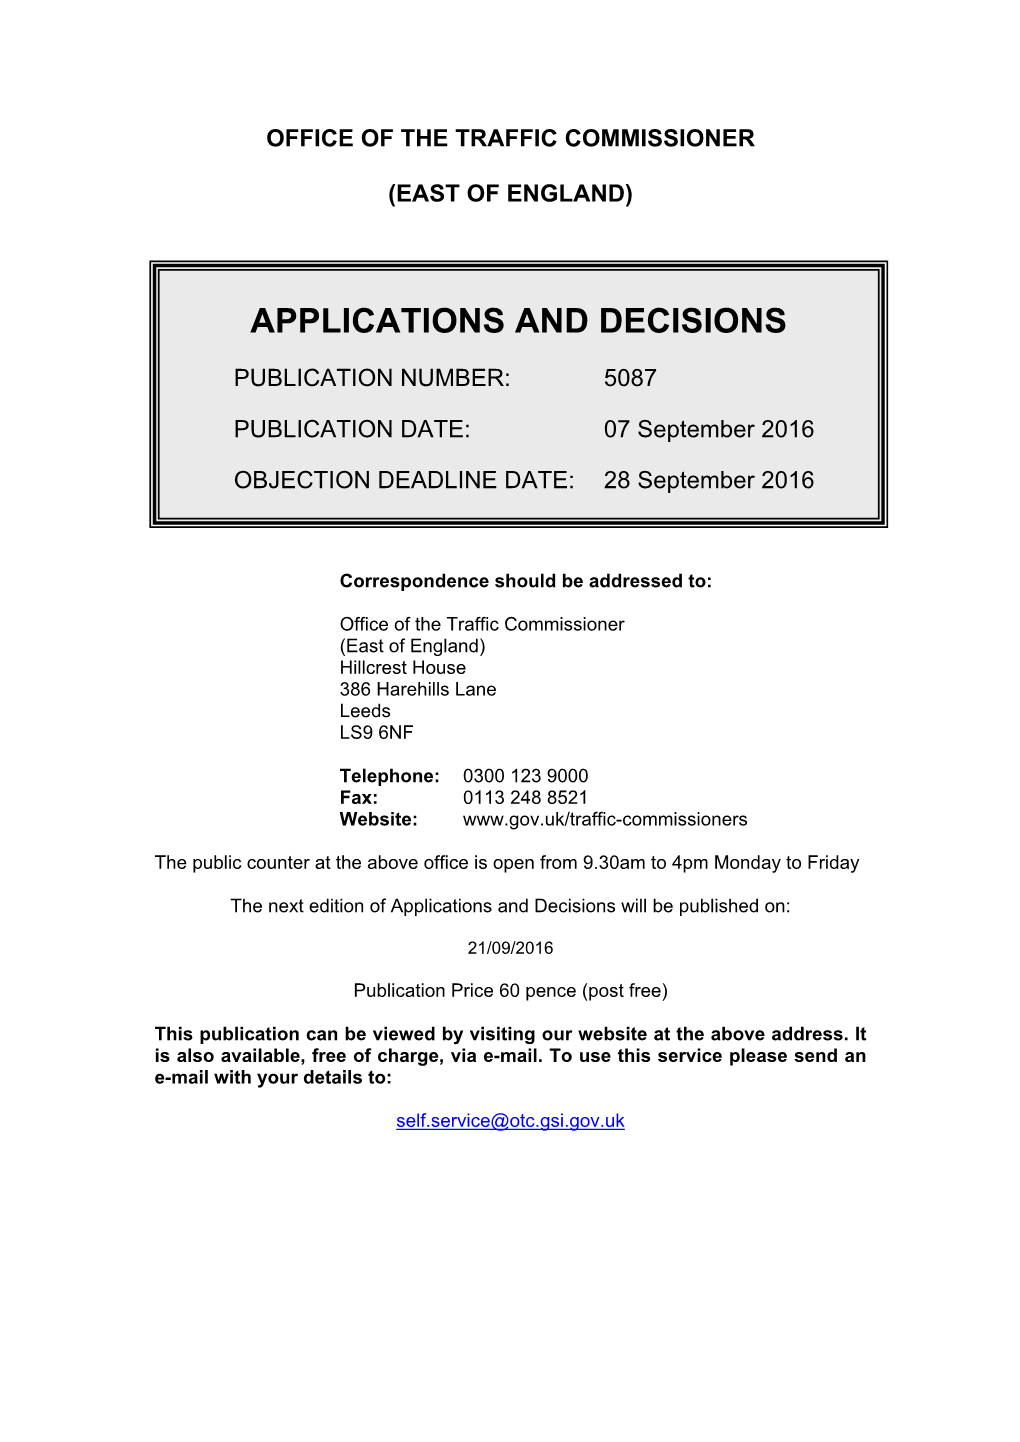 Applications and Decisions: East of England: 7 September 2016